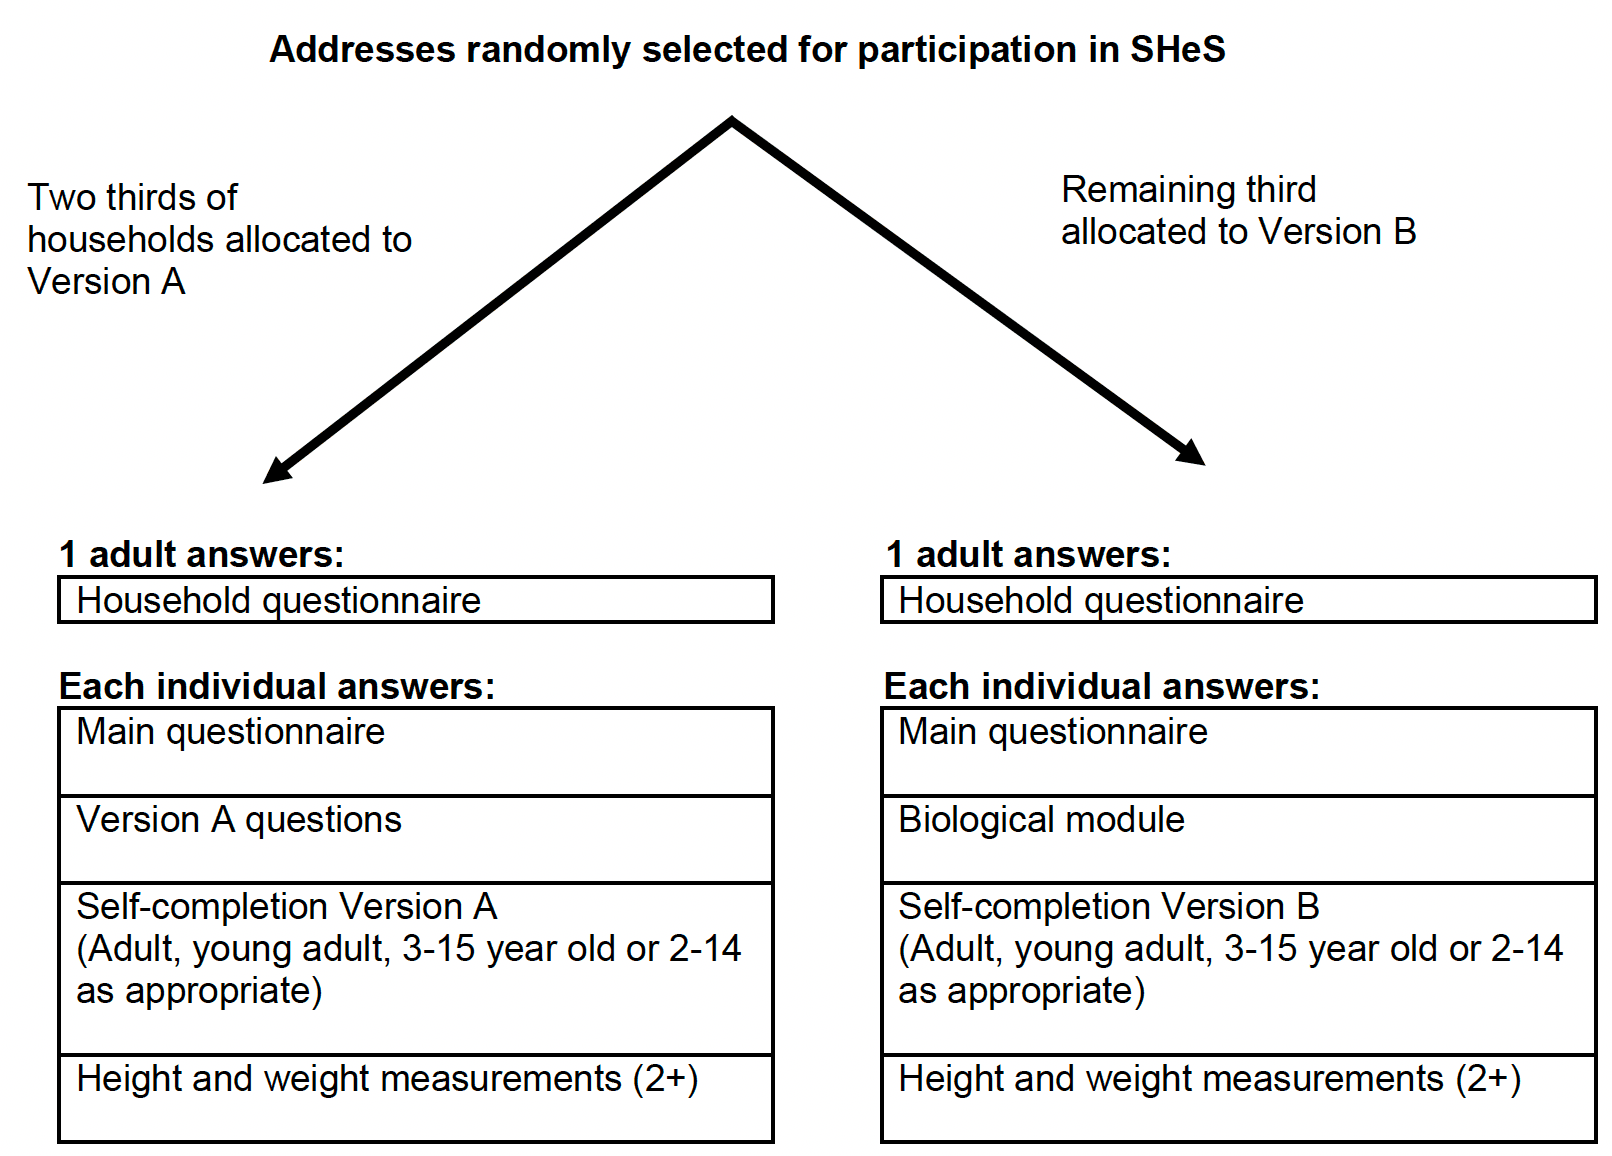 Figure 1, the Scottish Health Survey main sample allocation is shown. Two thirds of households are allocated to Version A and the remaining third is allocated to Version B.